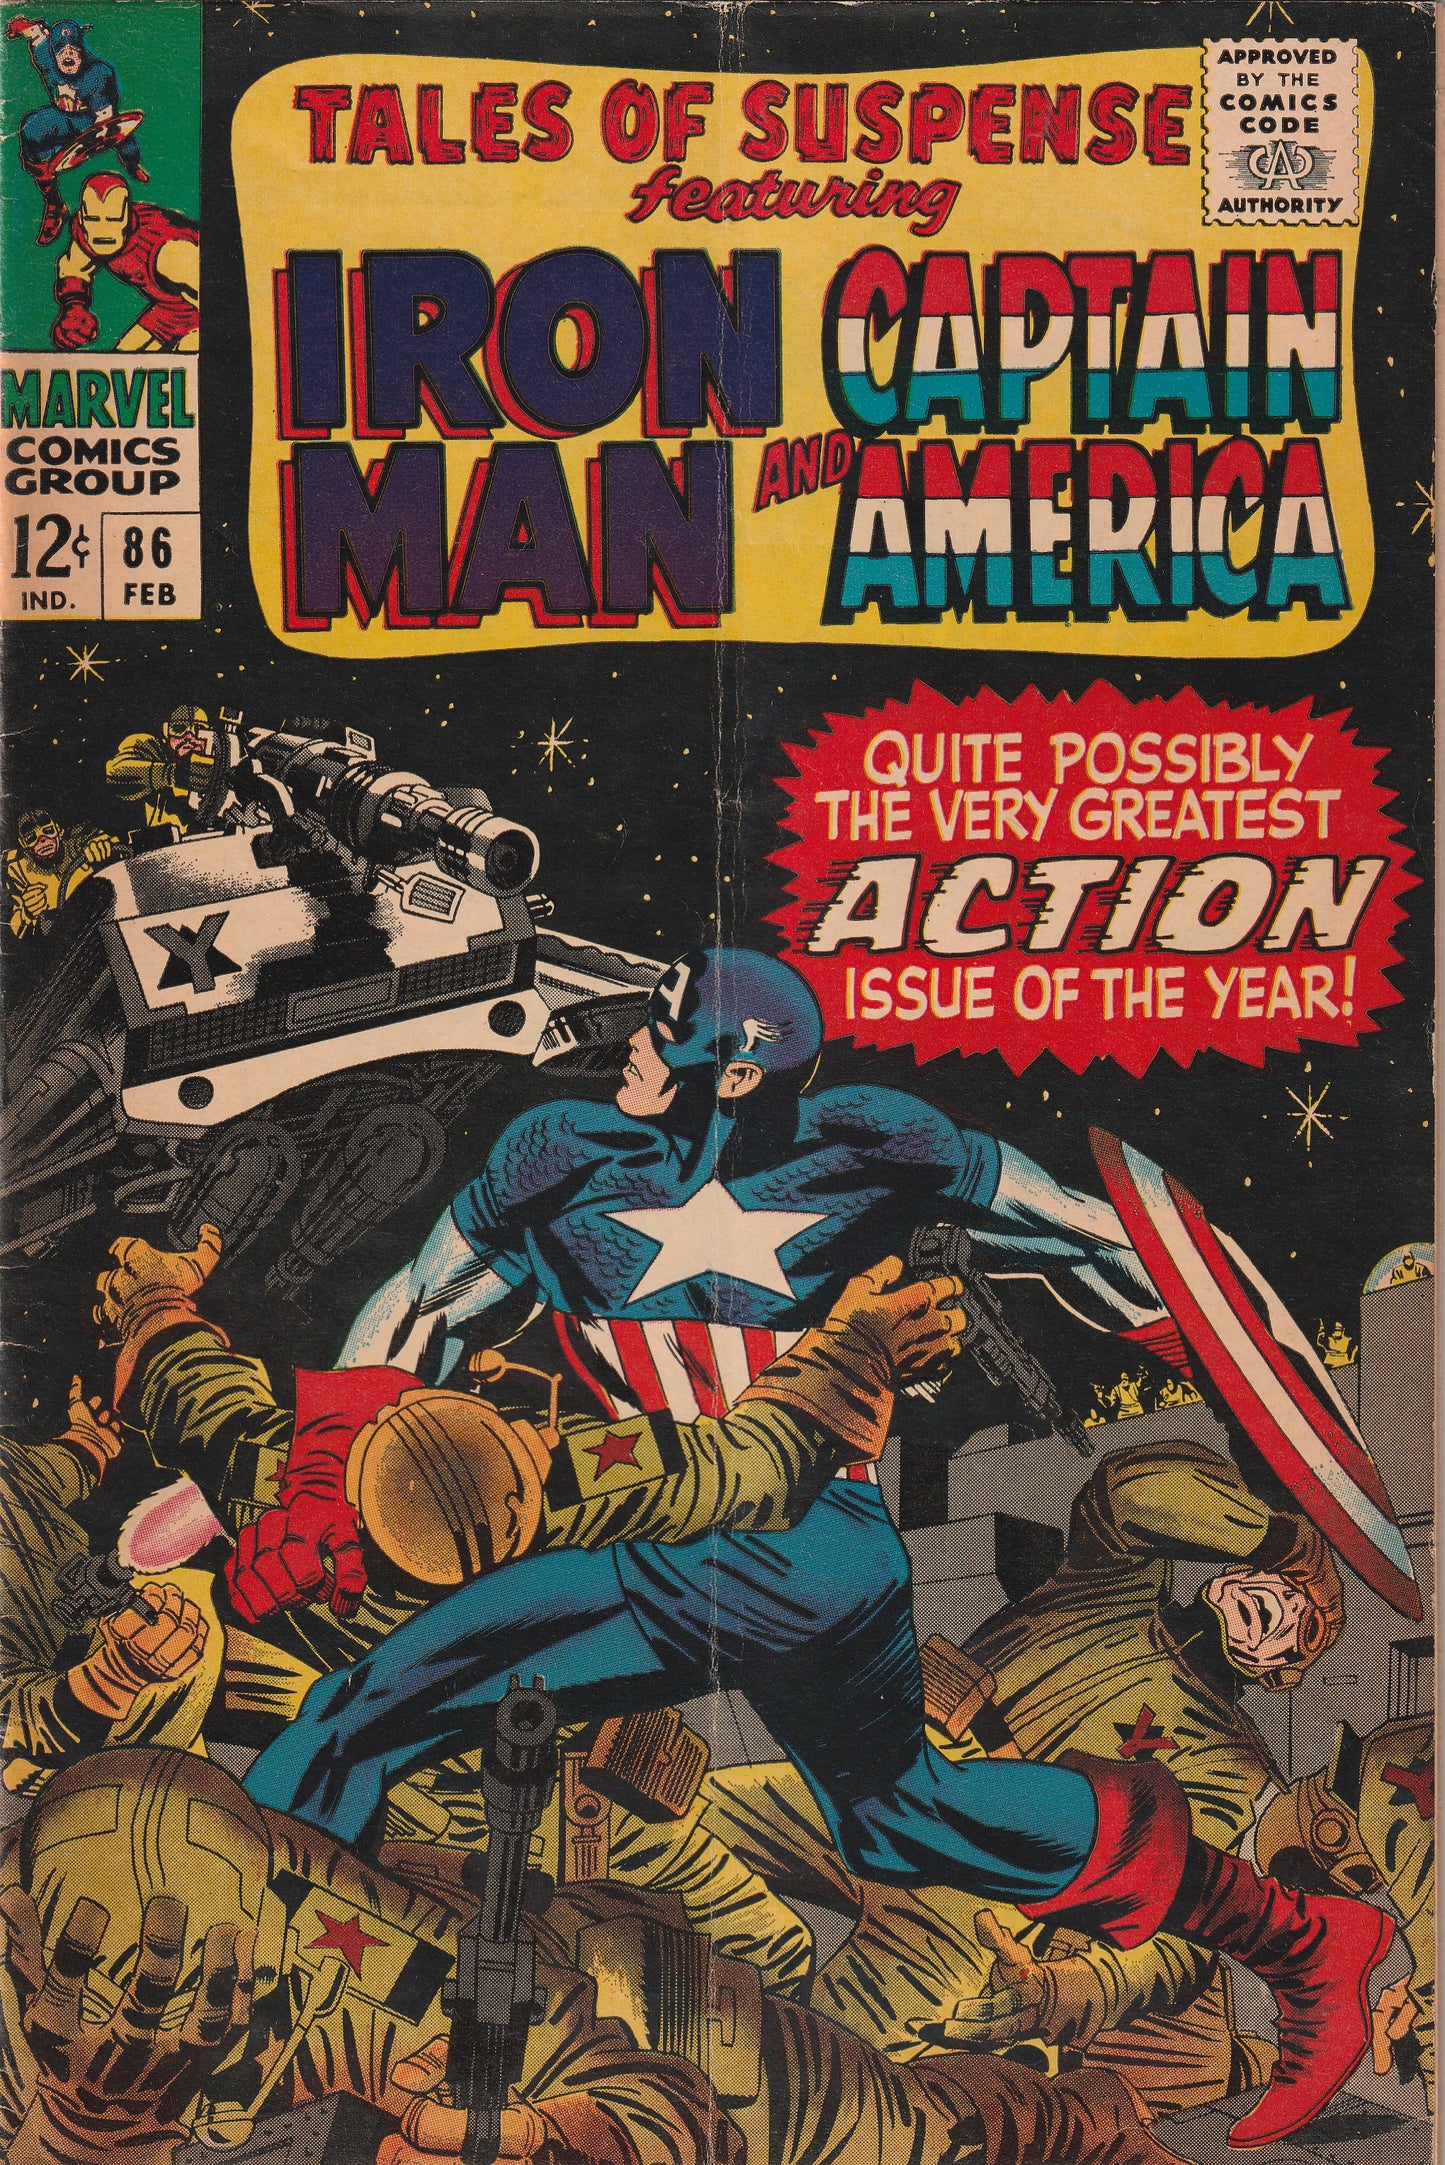 Tales of Suspense #86 (1967) - Featuring Iron Man and Captain America